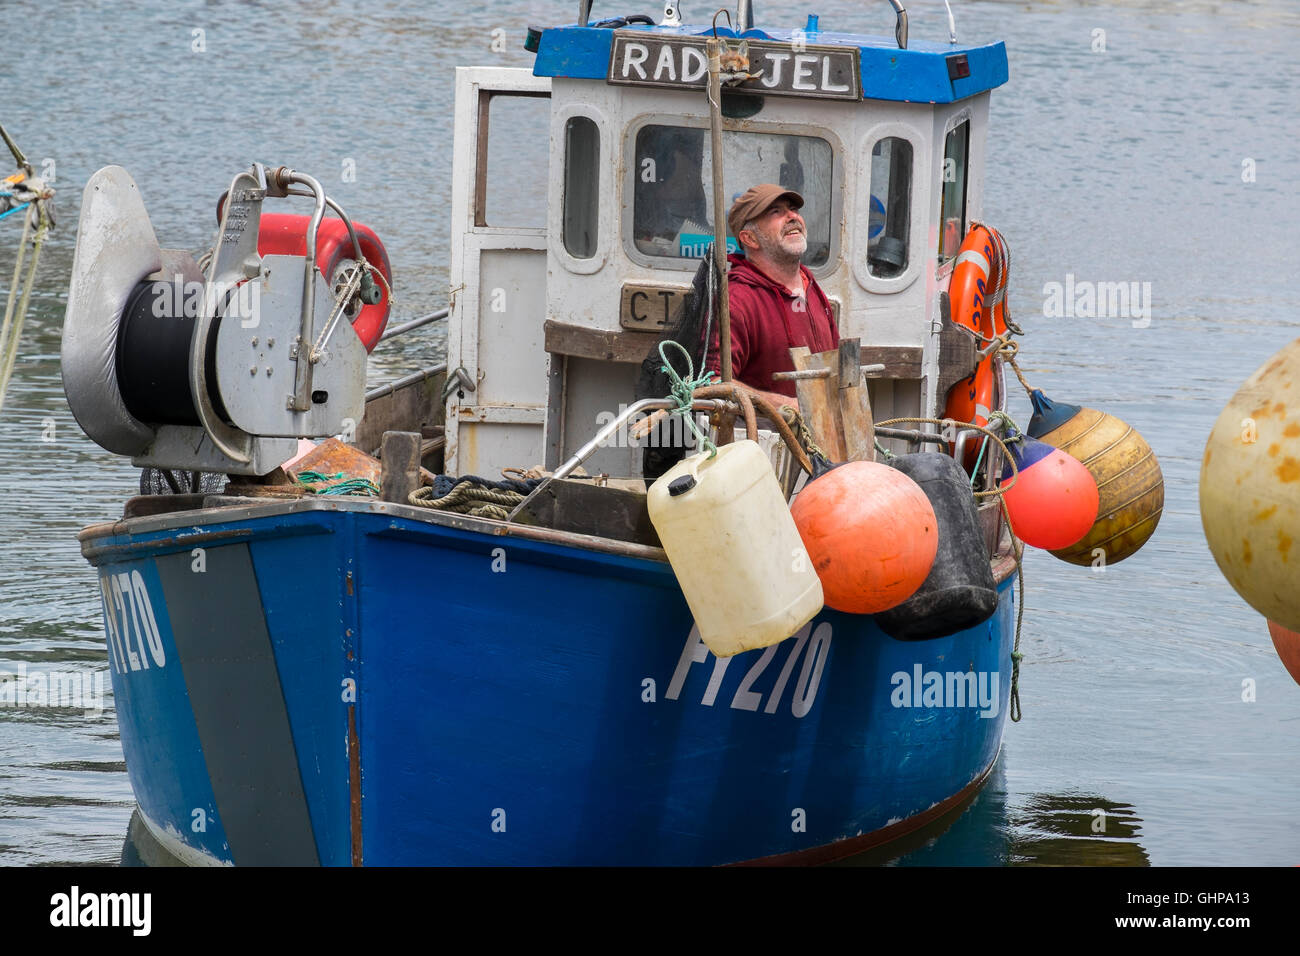 A fisherman and boat in Mevagissey Harbour, Cornwall, England, UK Stock Photo